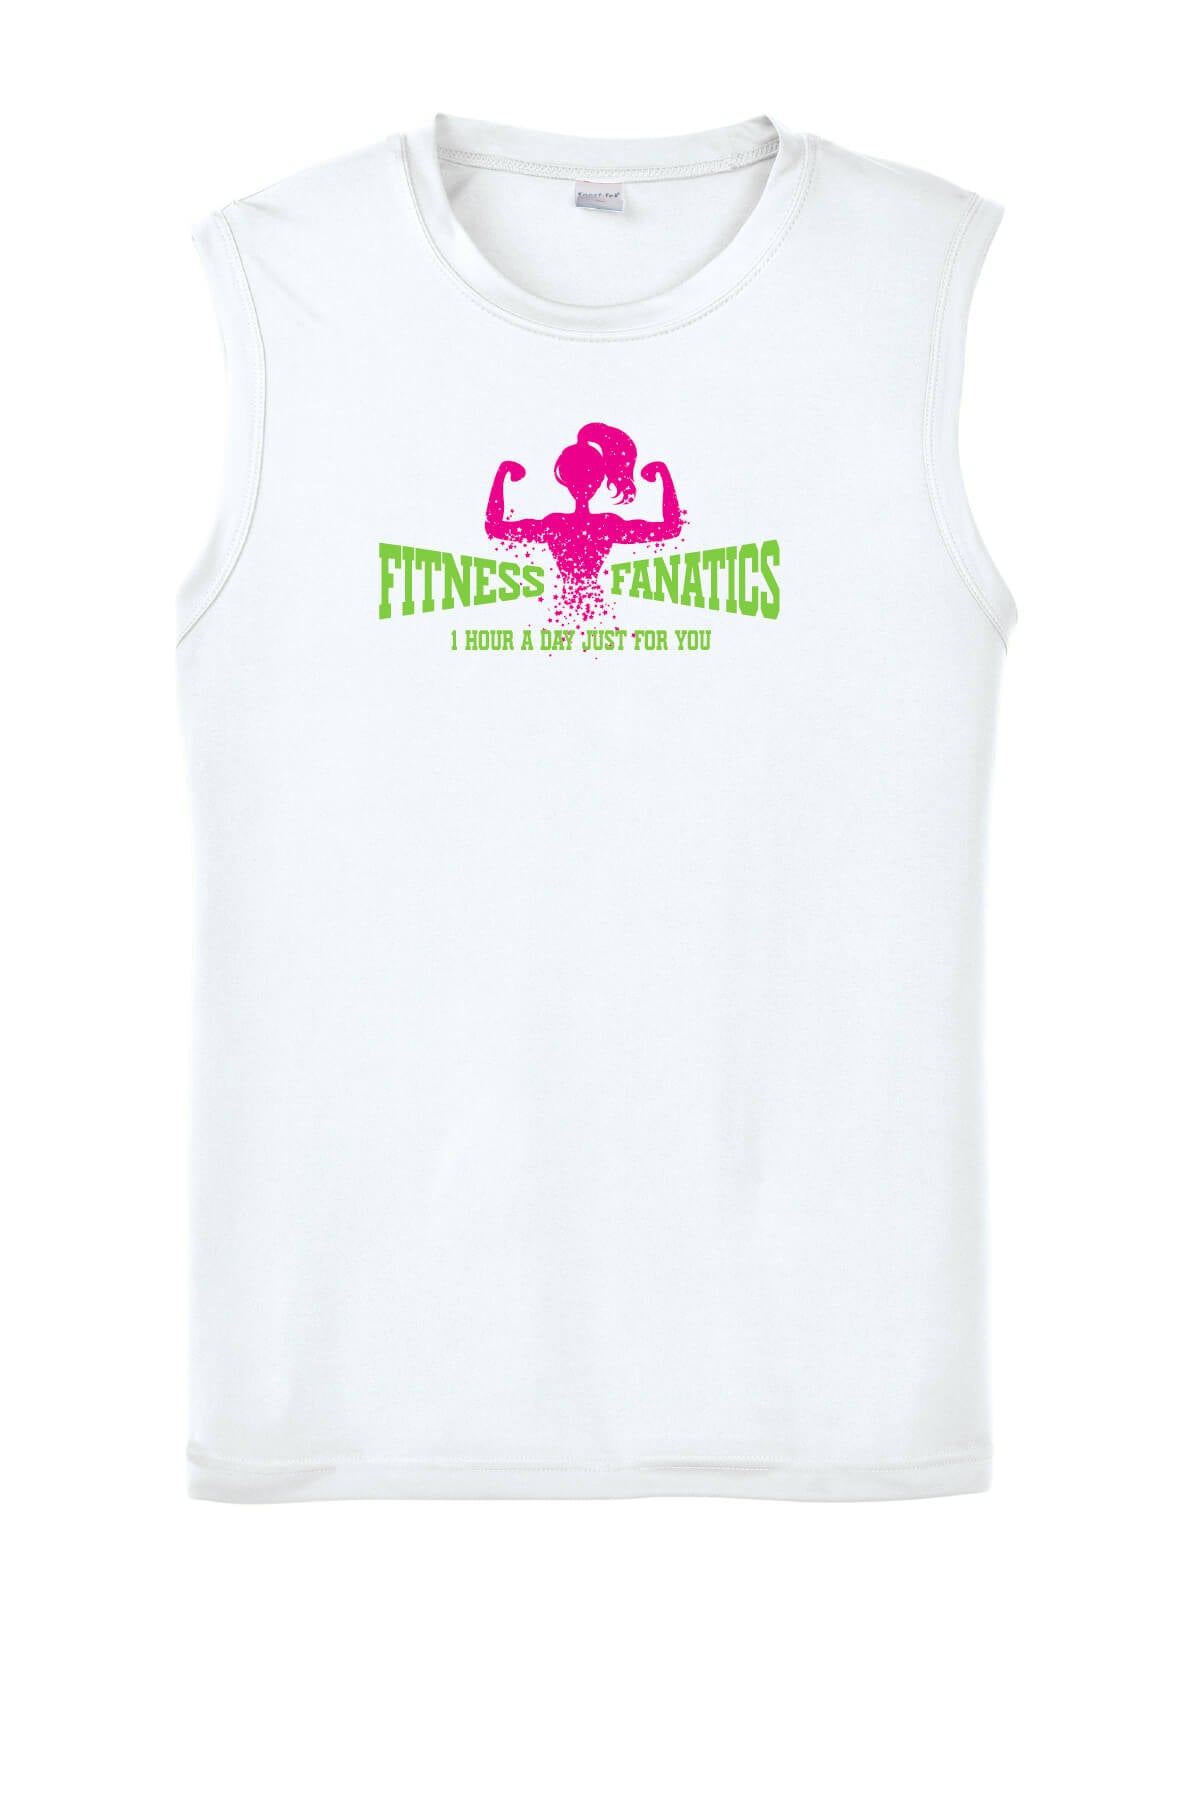 Mens Competitor Tank white with pink